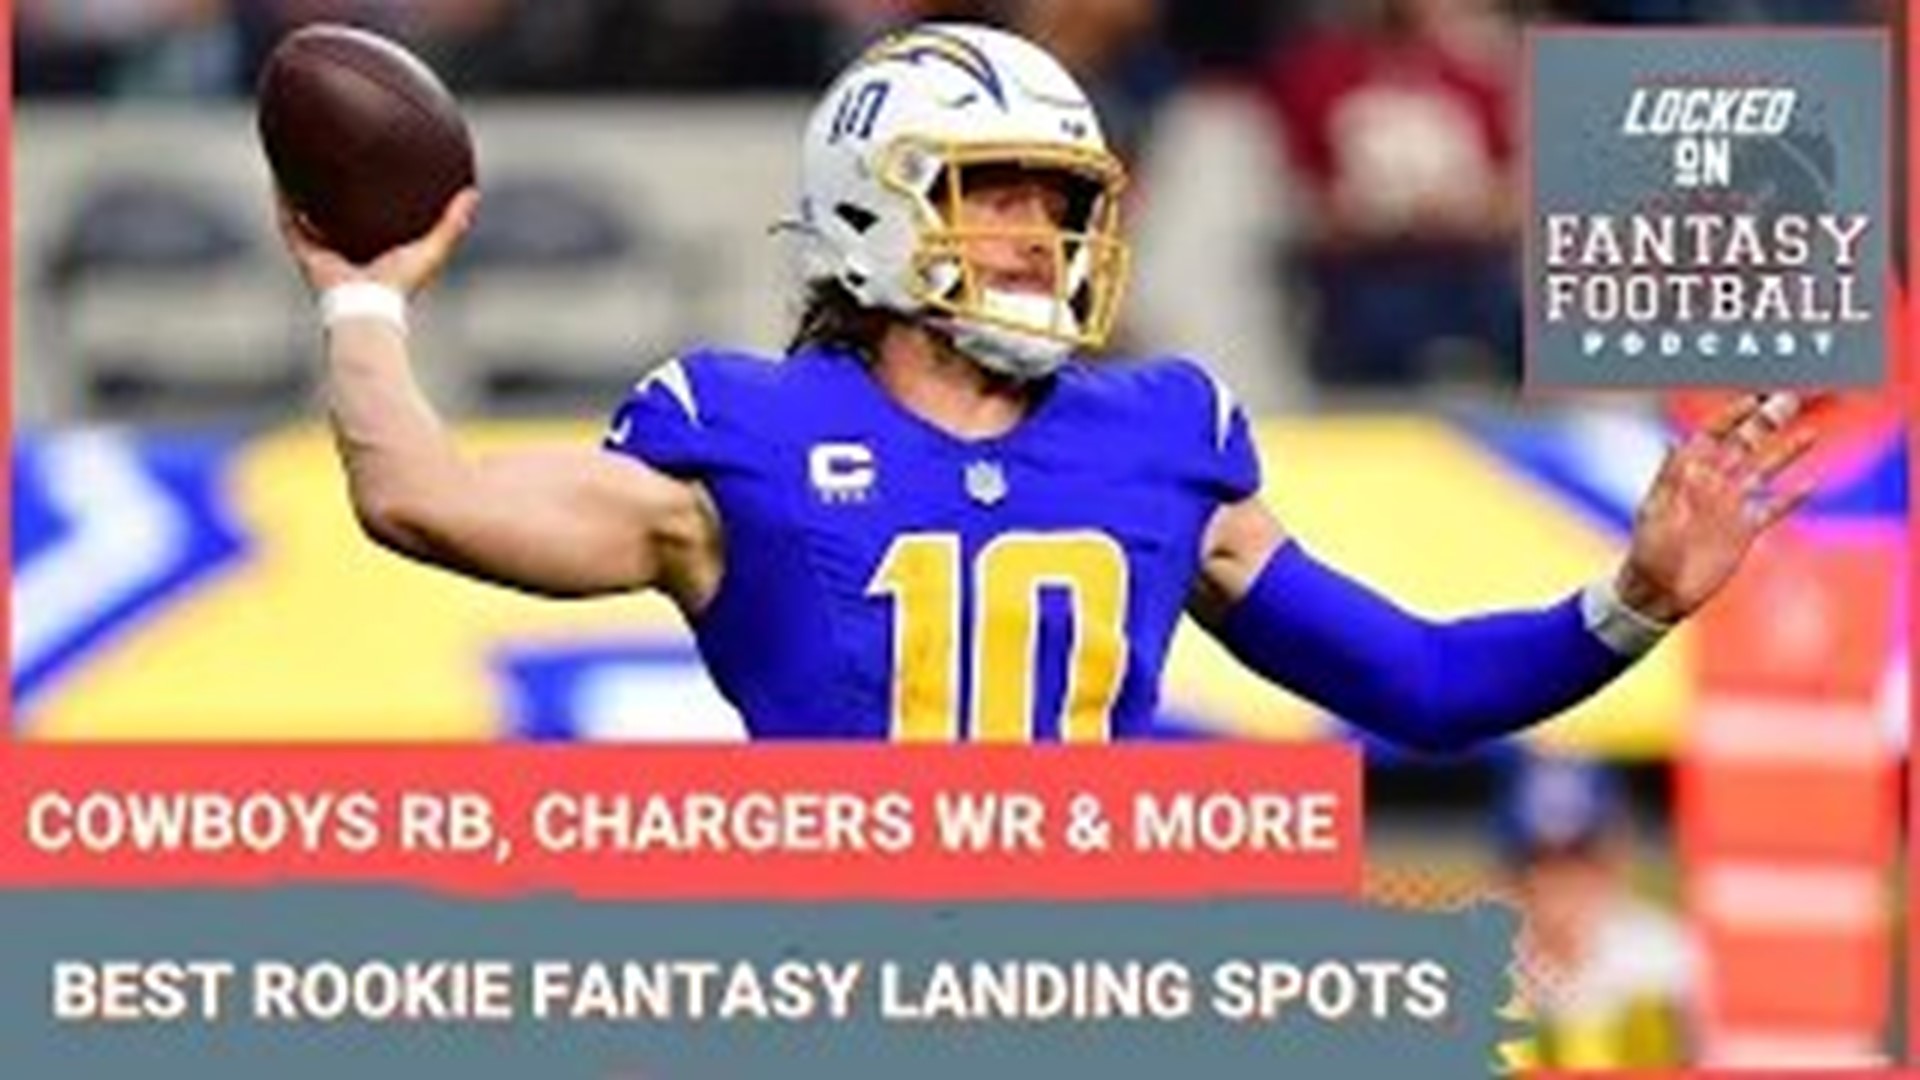 Sporting News.com's Vinnie Iyer and NFL.com's Michelle Magdziuk break down the best fantasy football landing spots for top rookies in the 2024 NFL Draft.